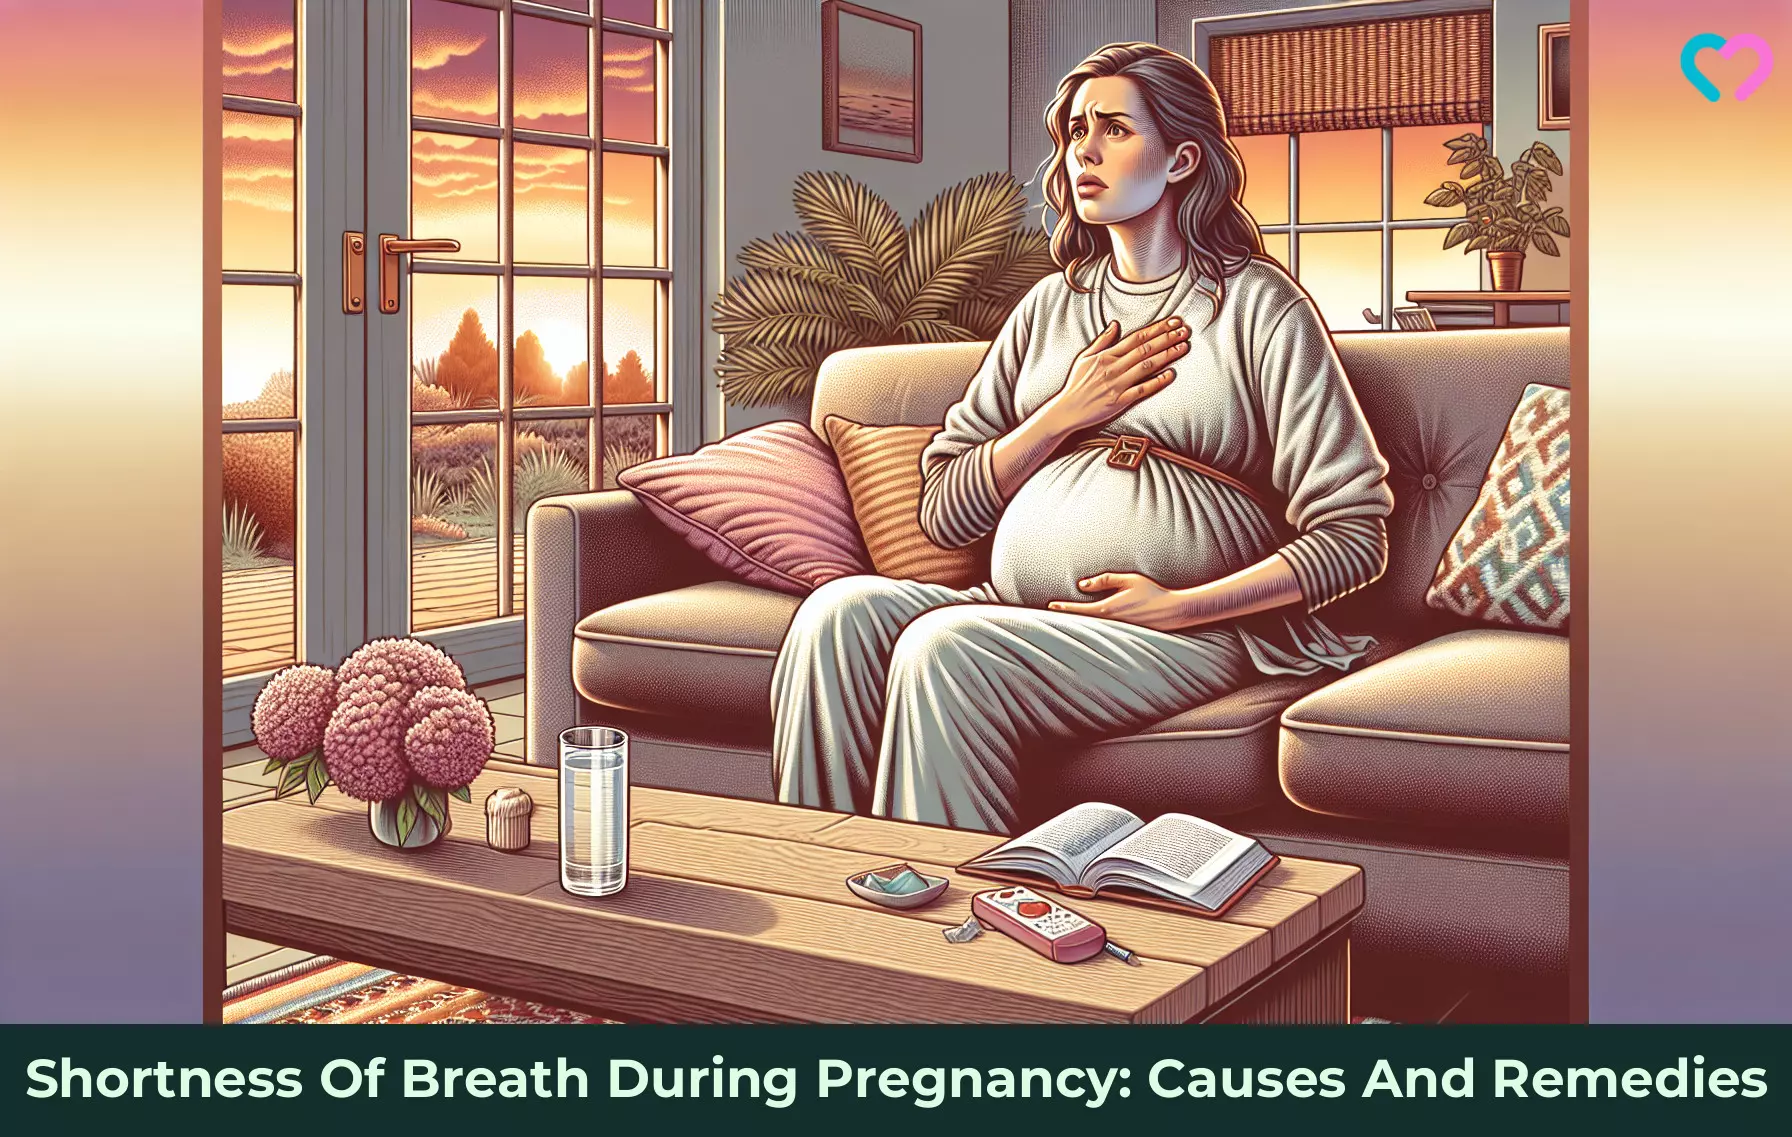 breathing difficulty during pregnancy_illustration